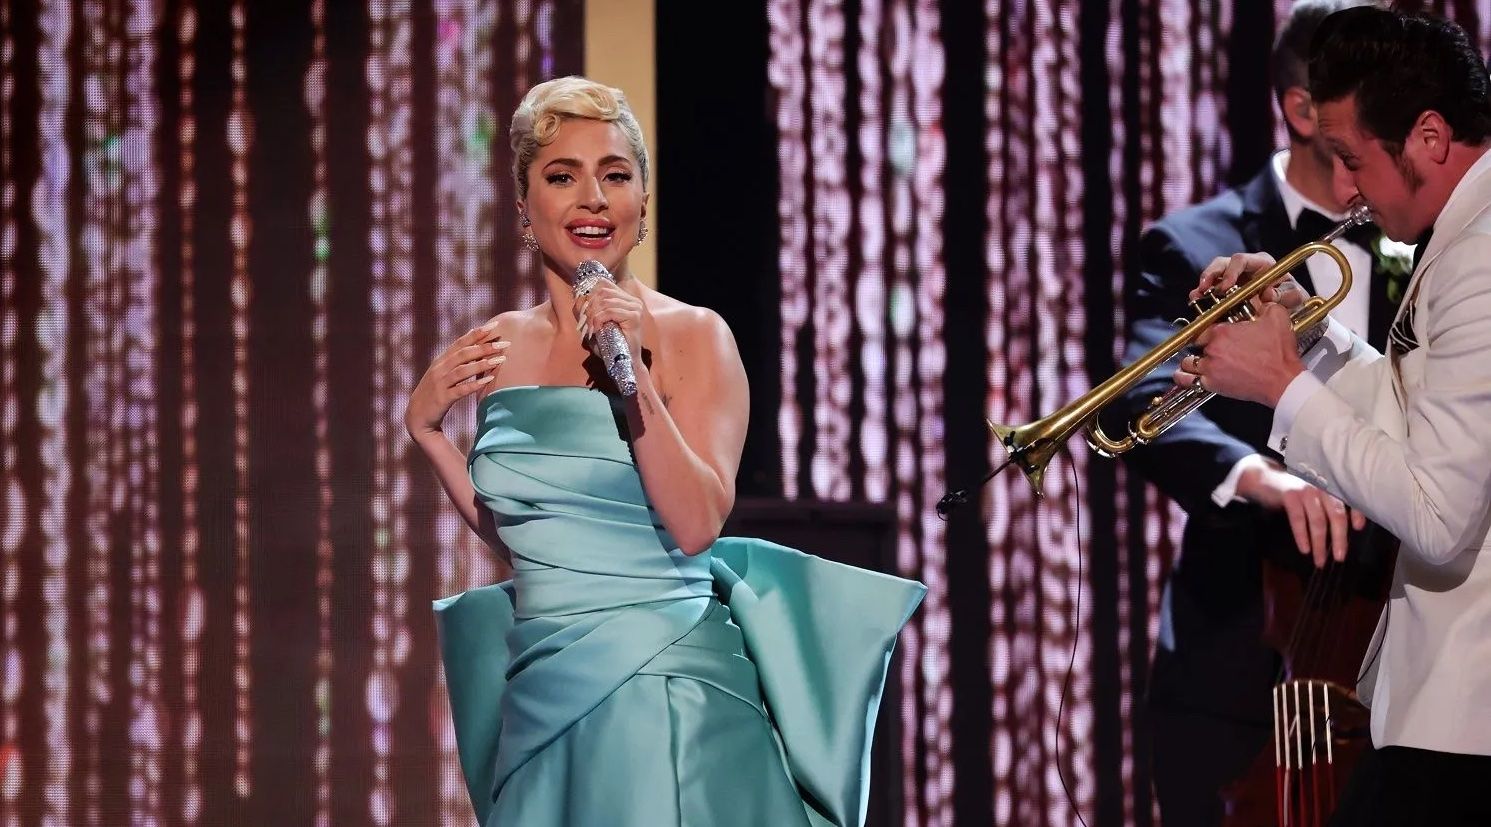 Winners and Highlights From the 2022 Grammy Awards